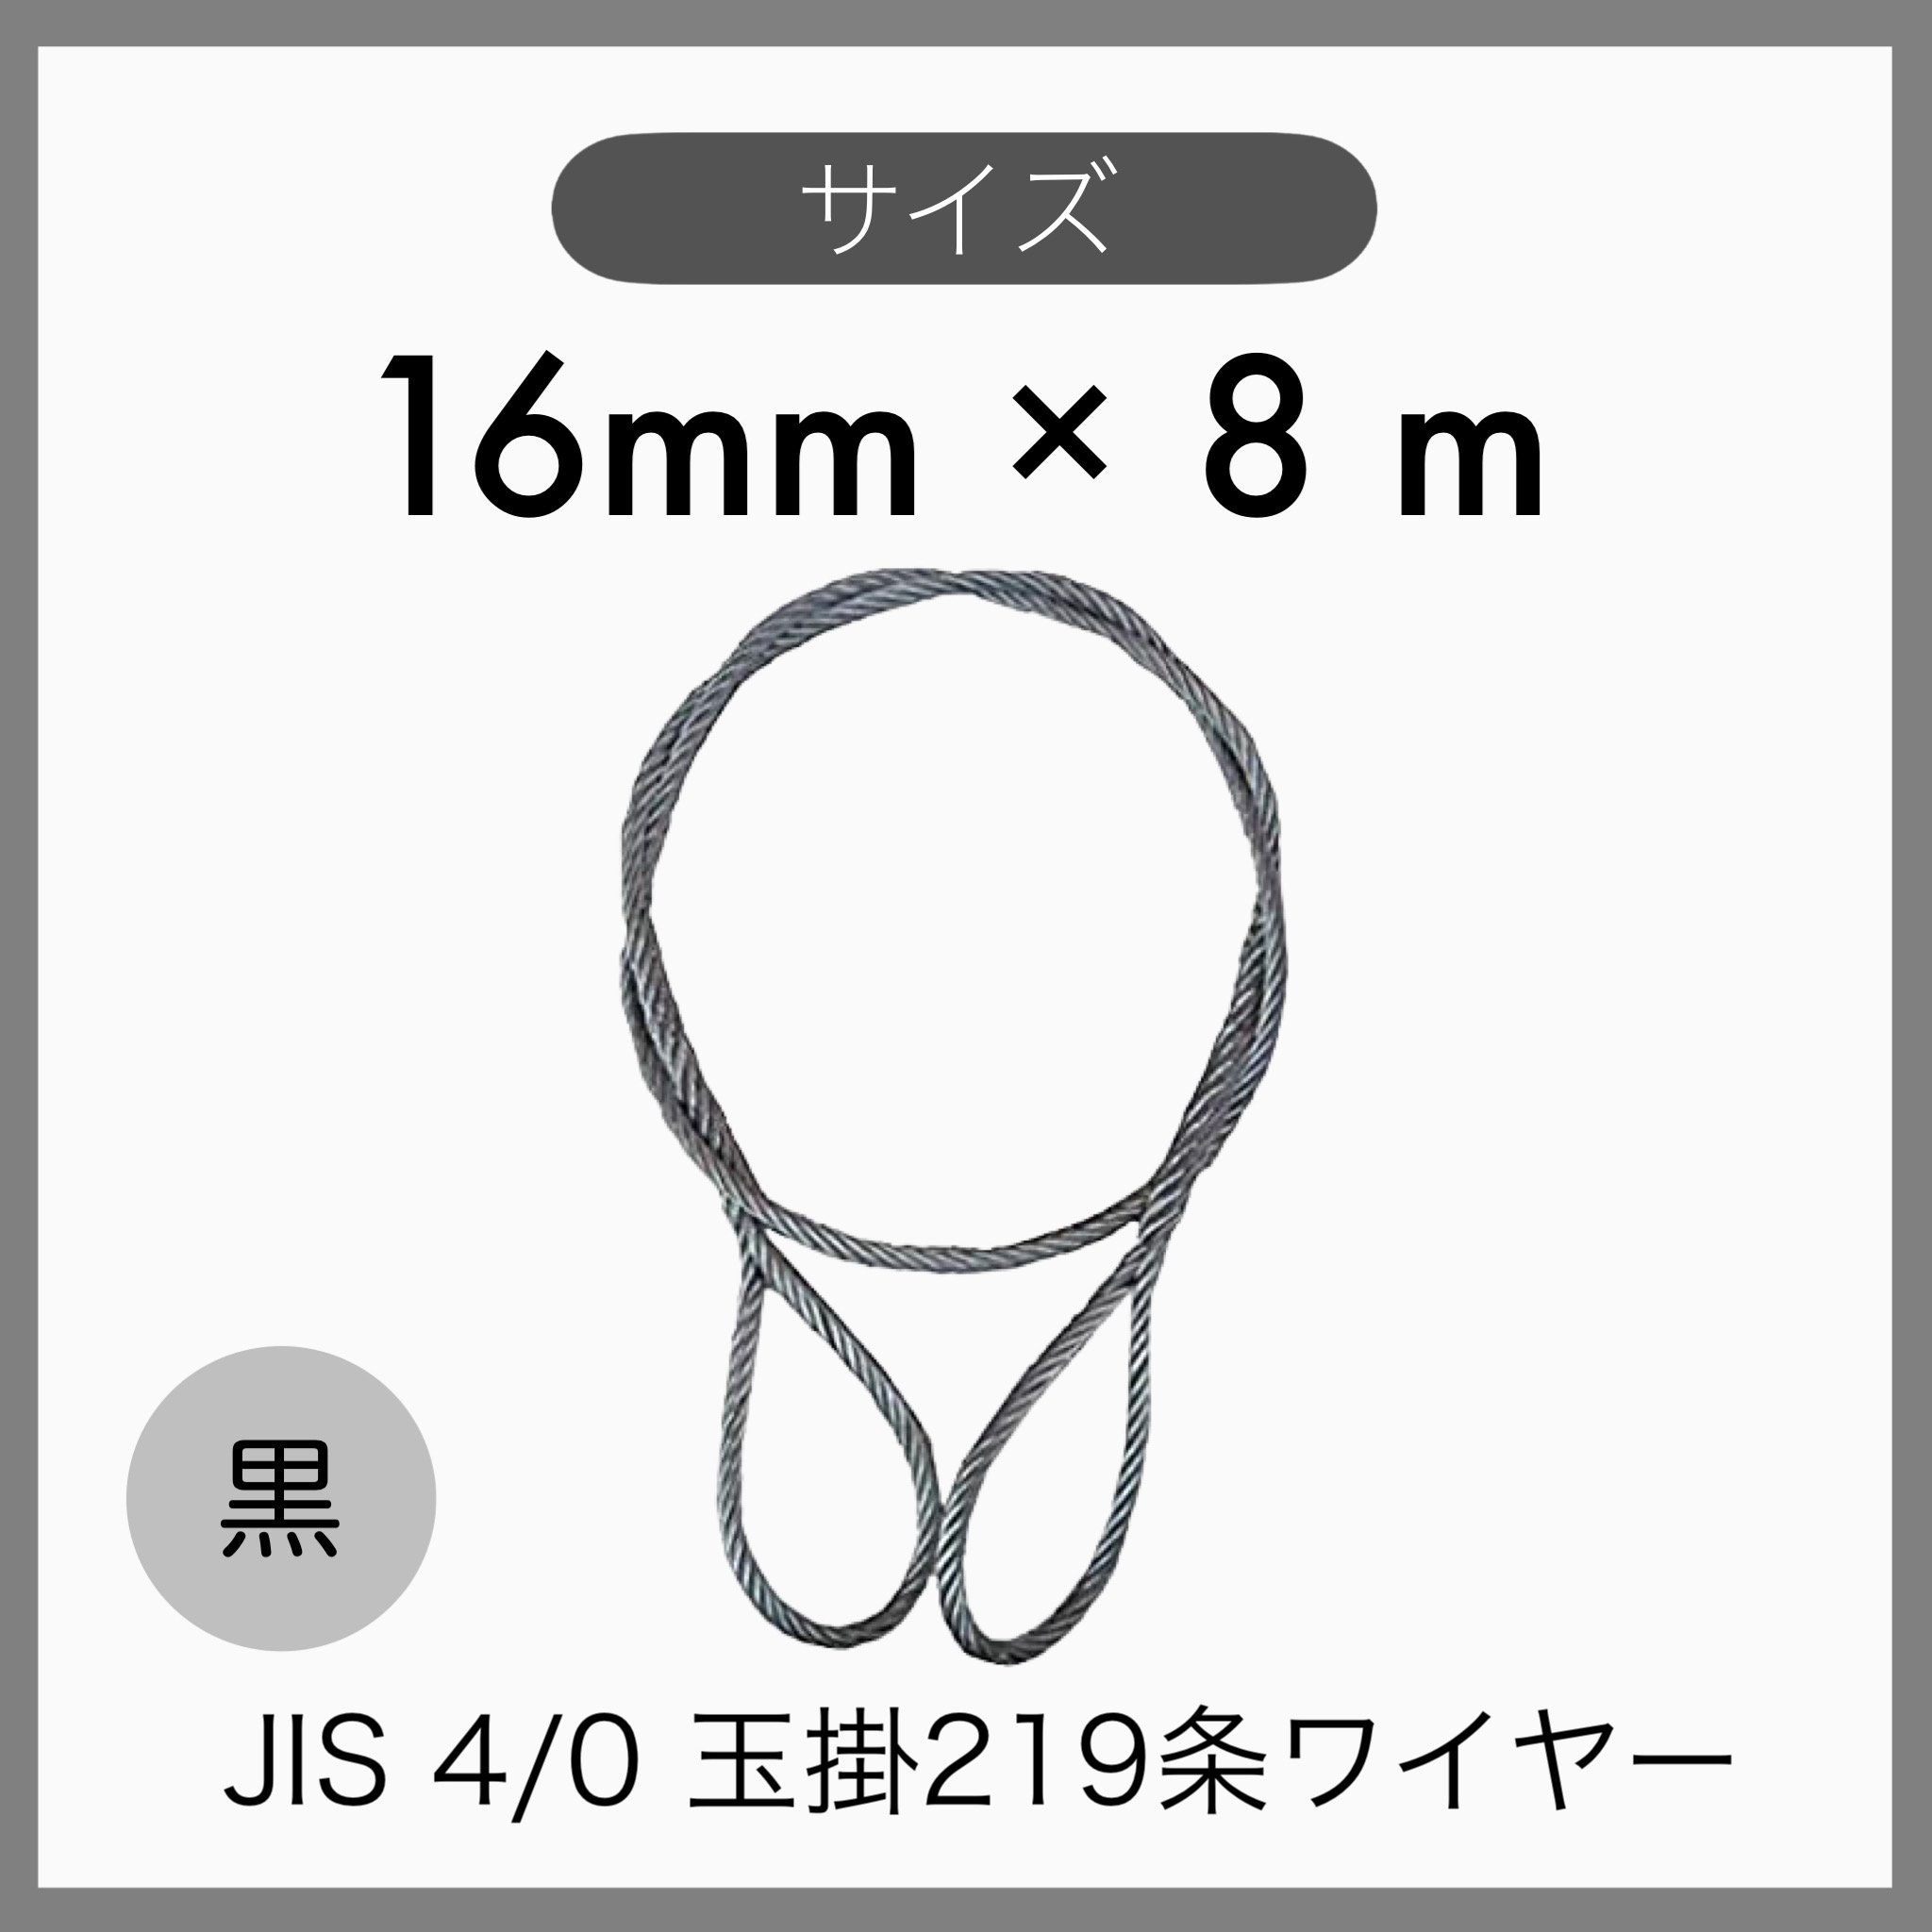 10 pcs set JIS O/O black sphere .. wire sphere ..219 article wire knitting imported goods 16mm×8m